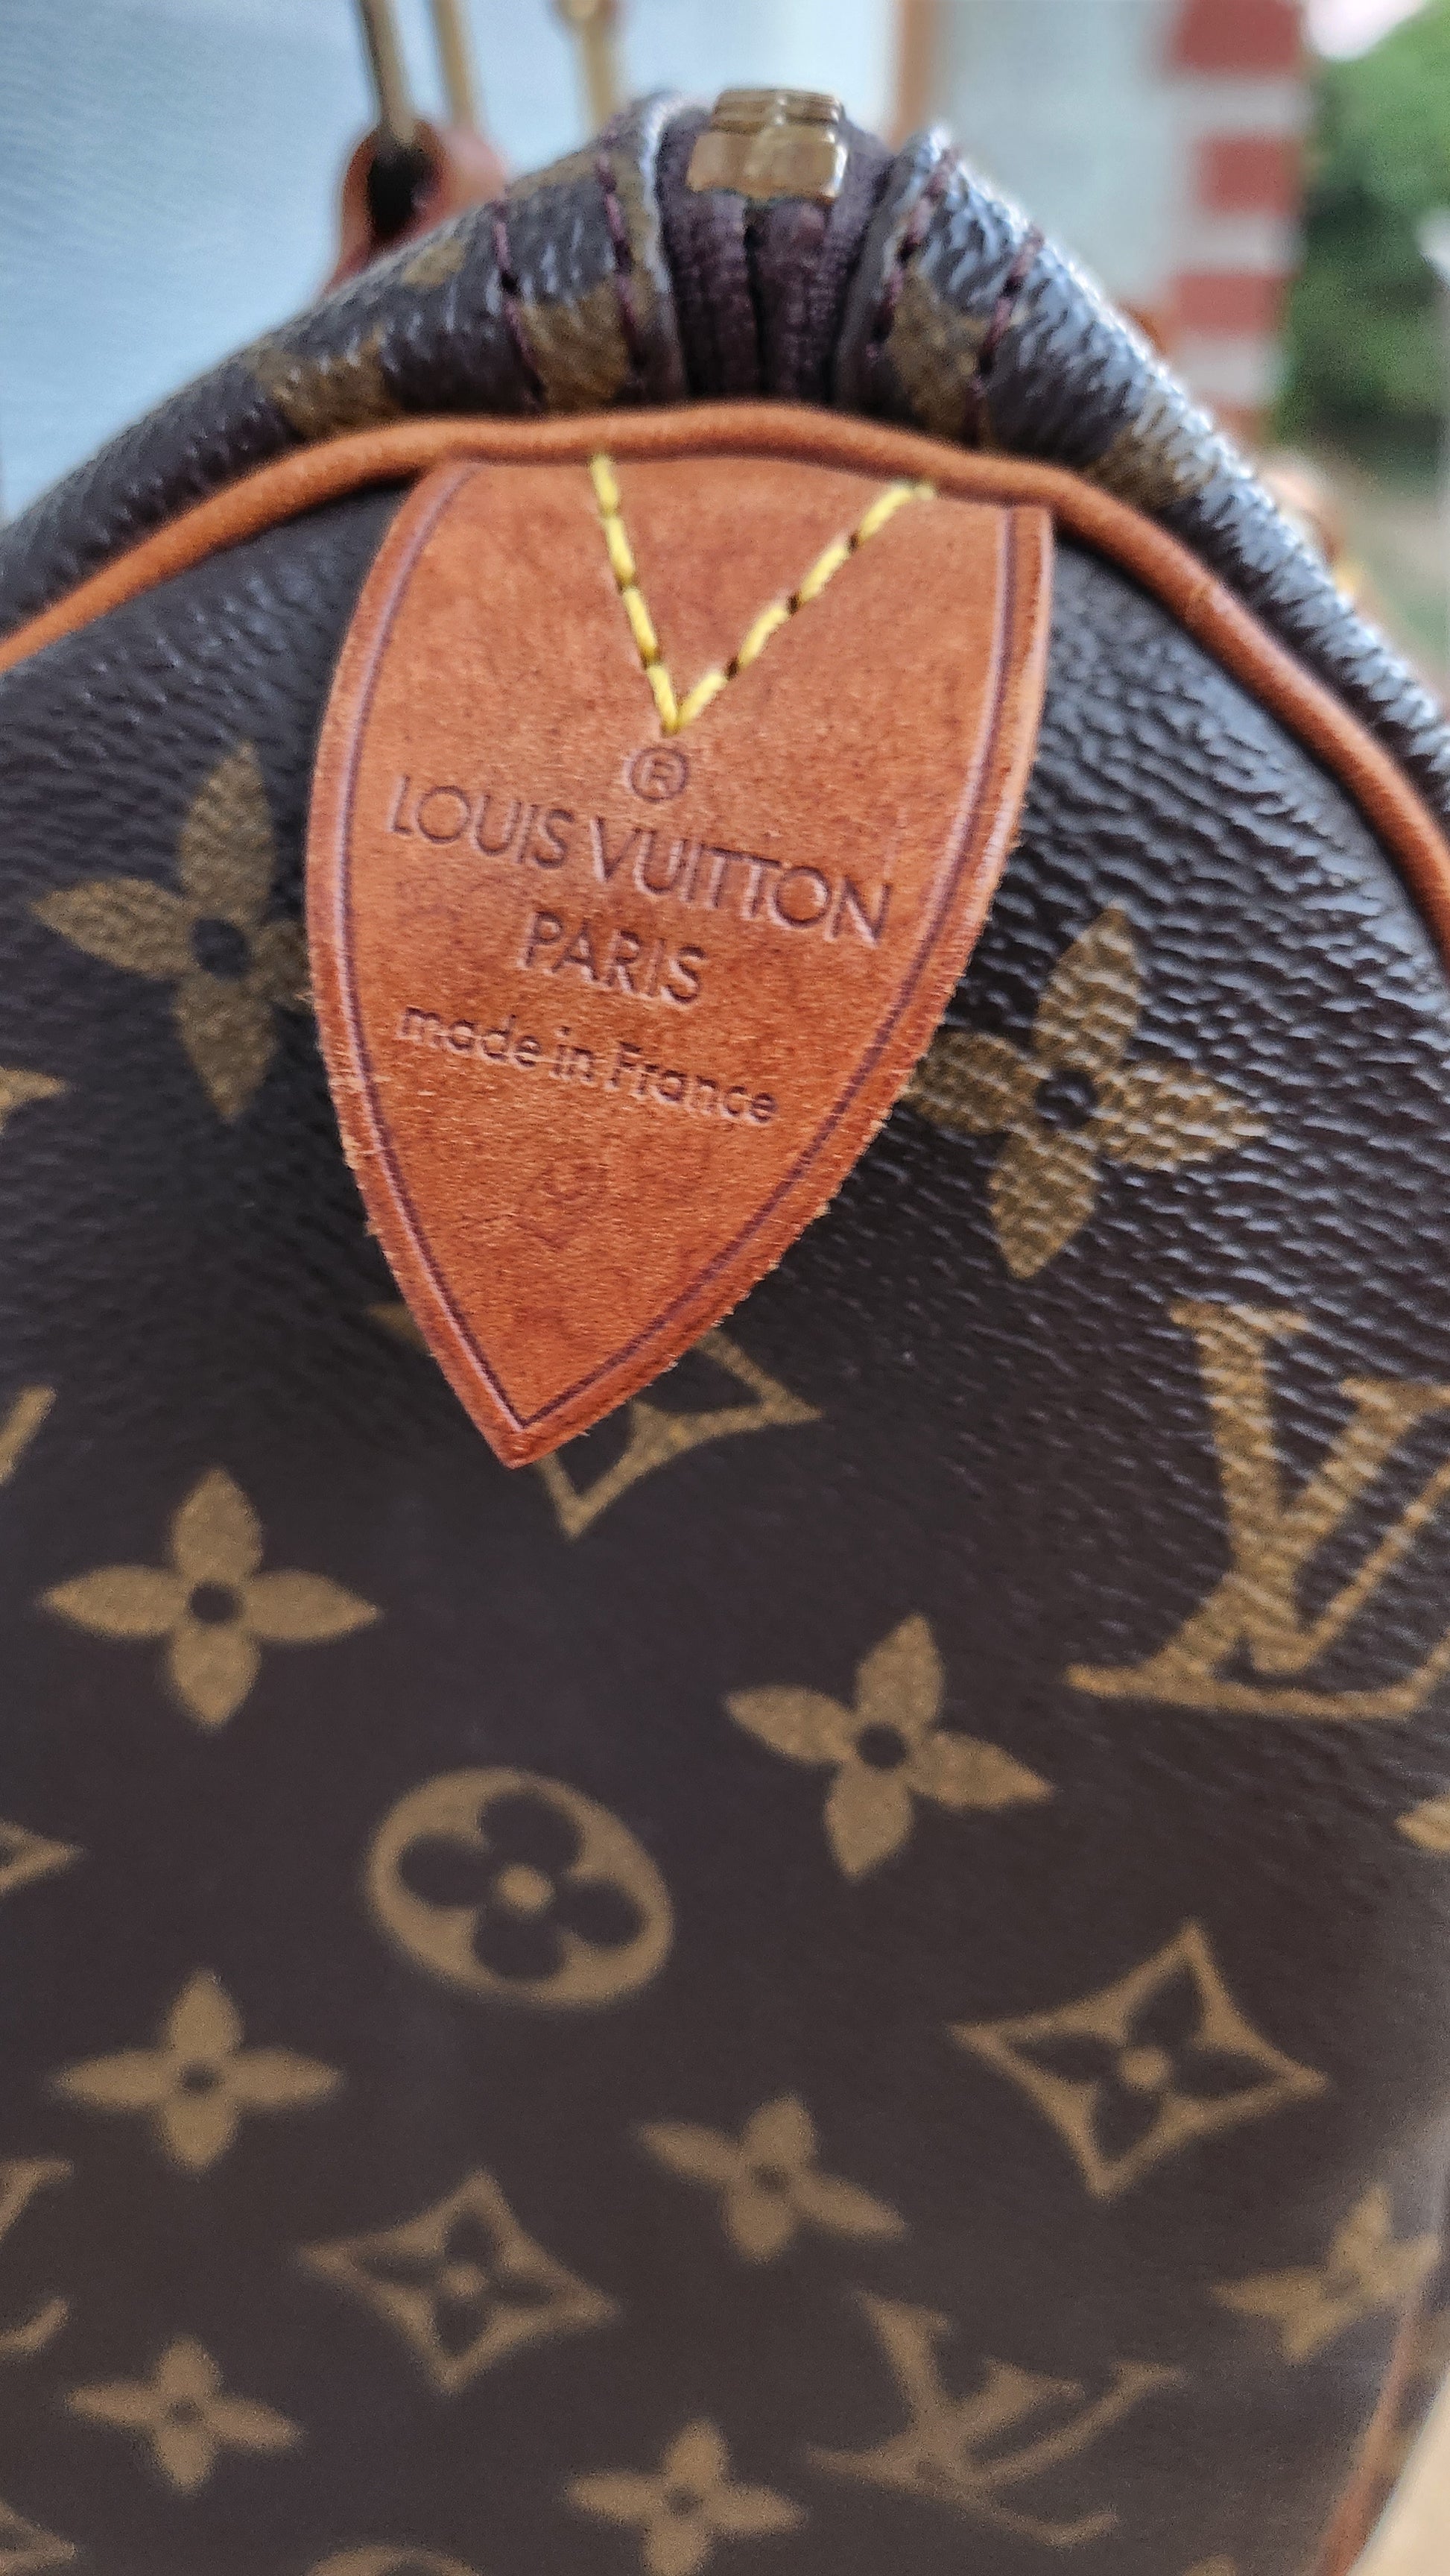 About the Louis Vuitton Speedy